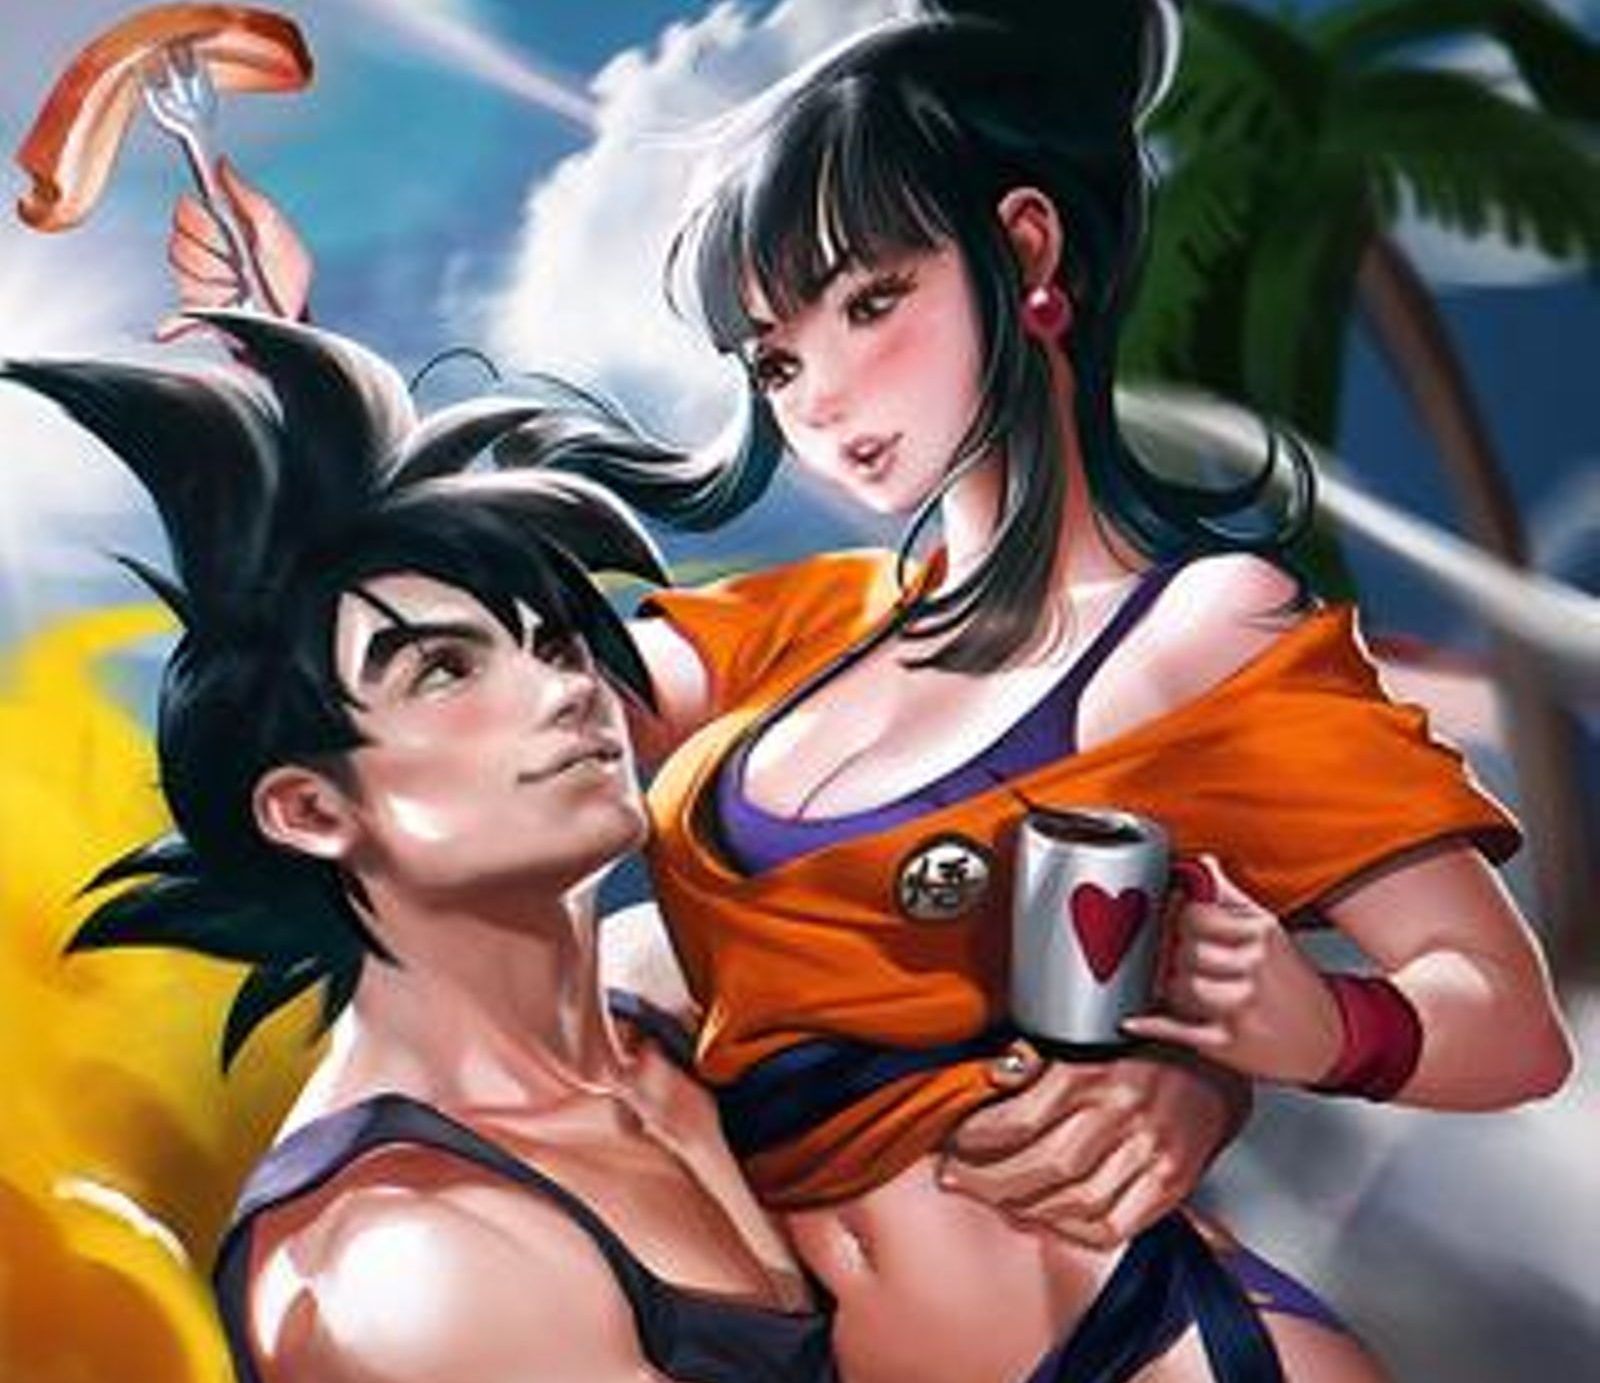 Dragon Ball 25 Things You Didn’t Know About Goku’s Family